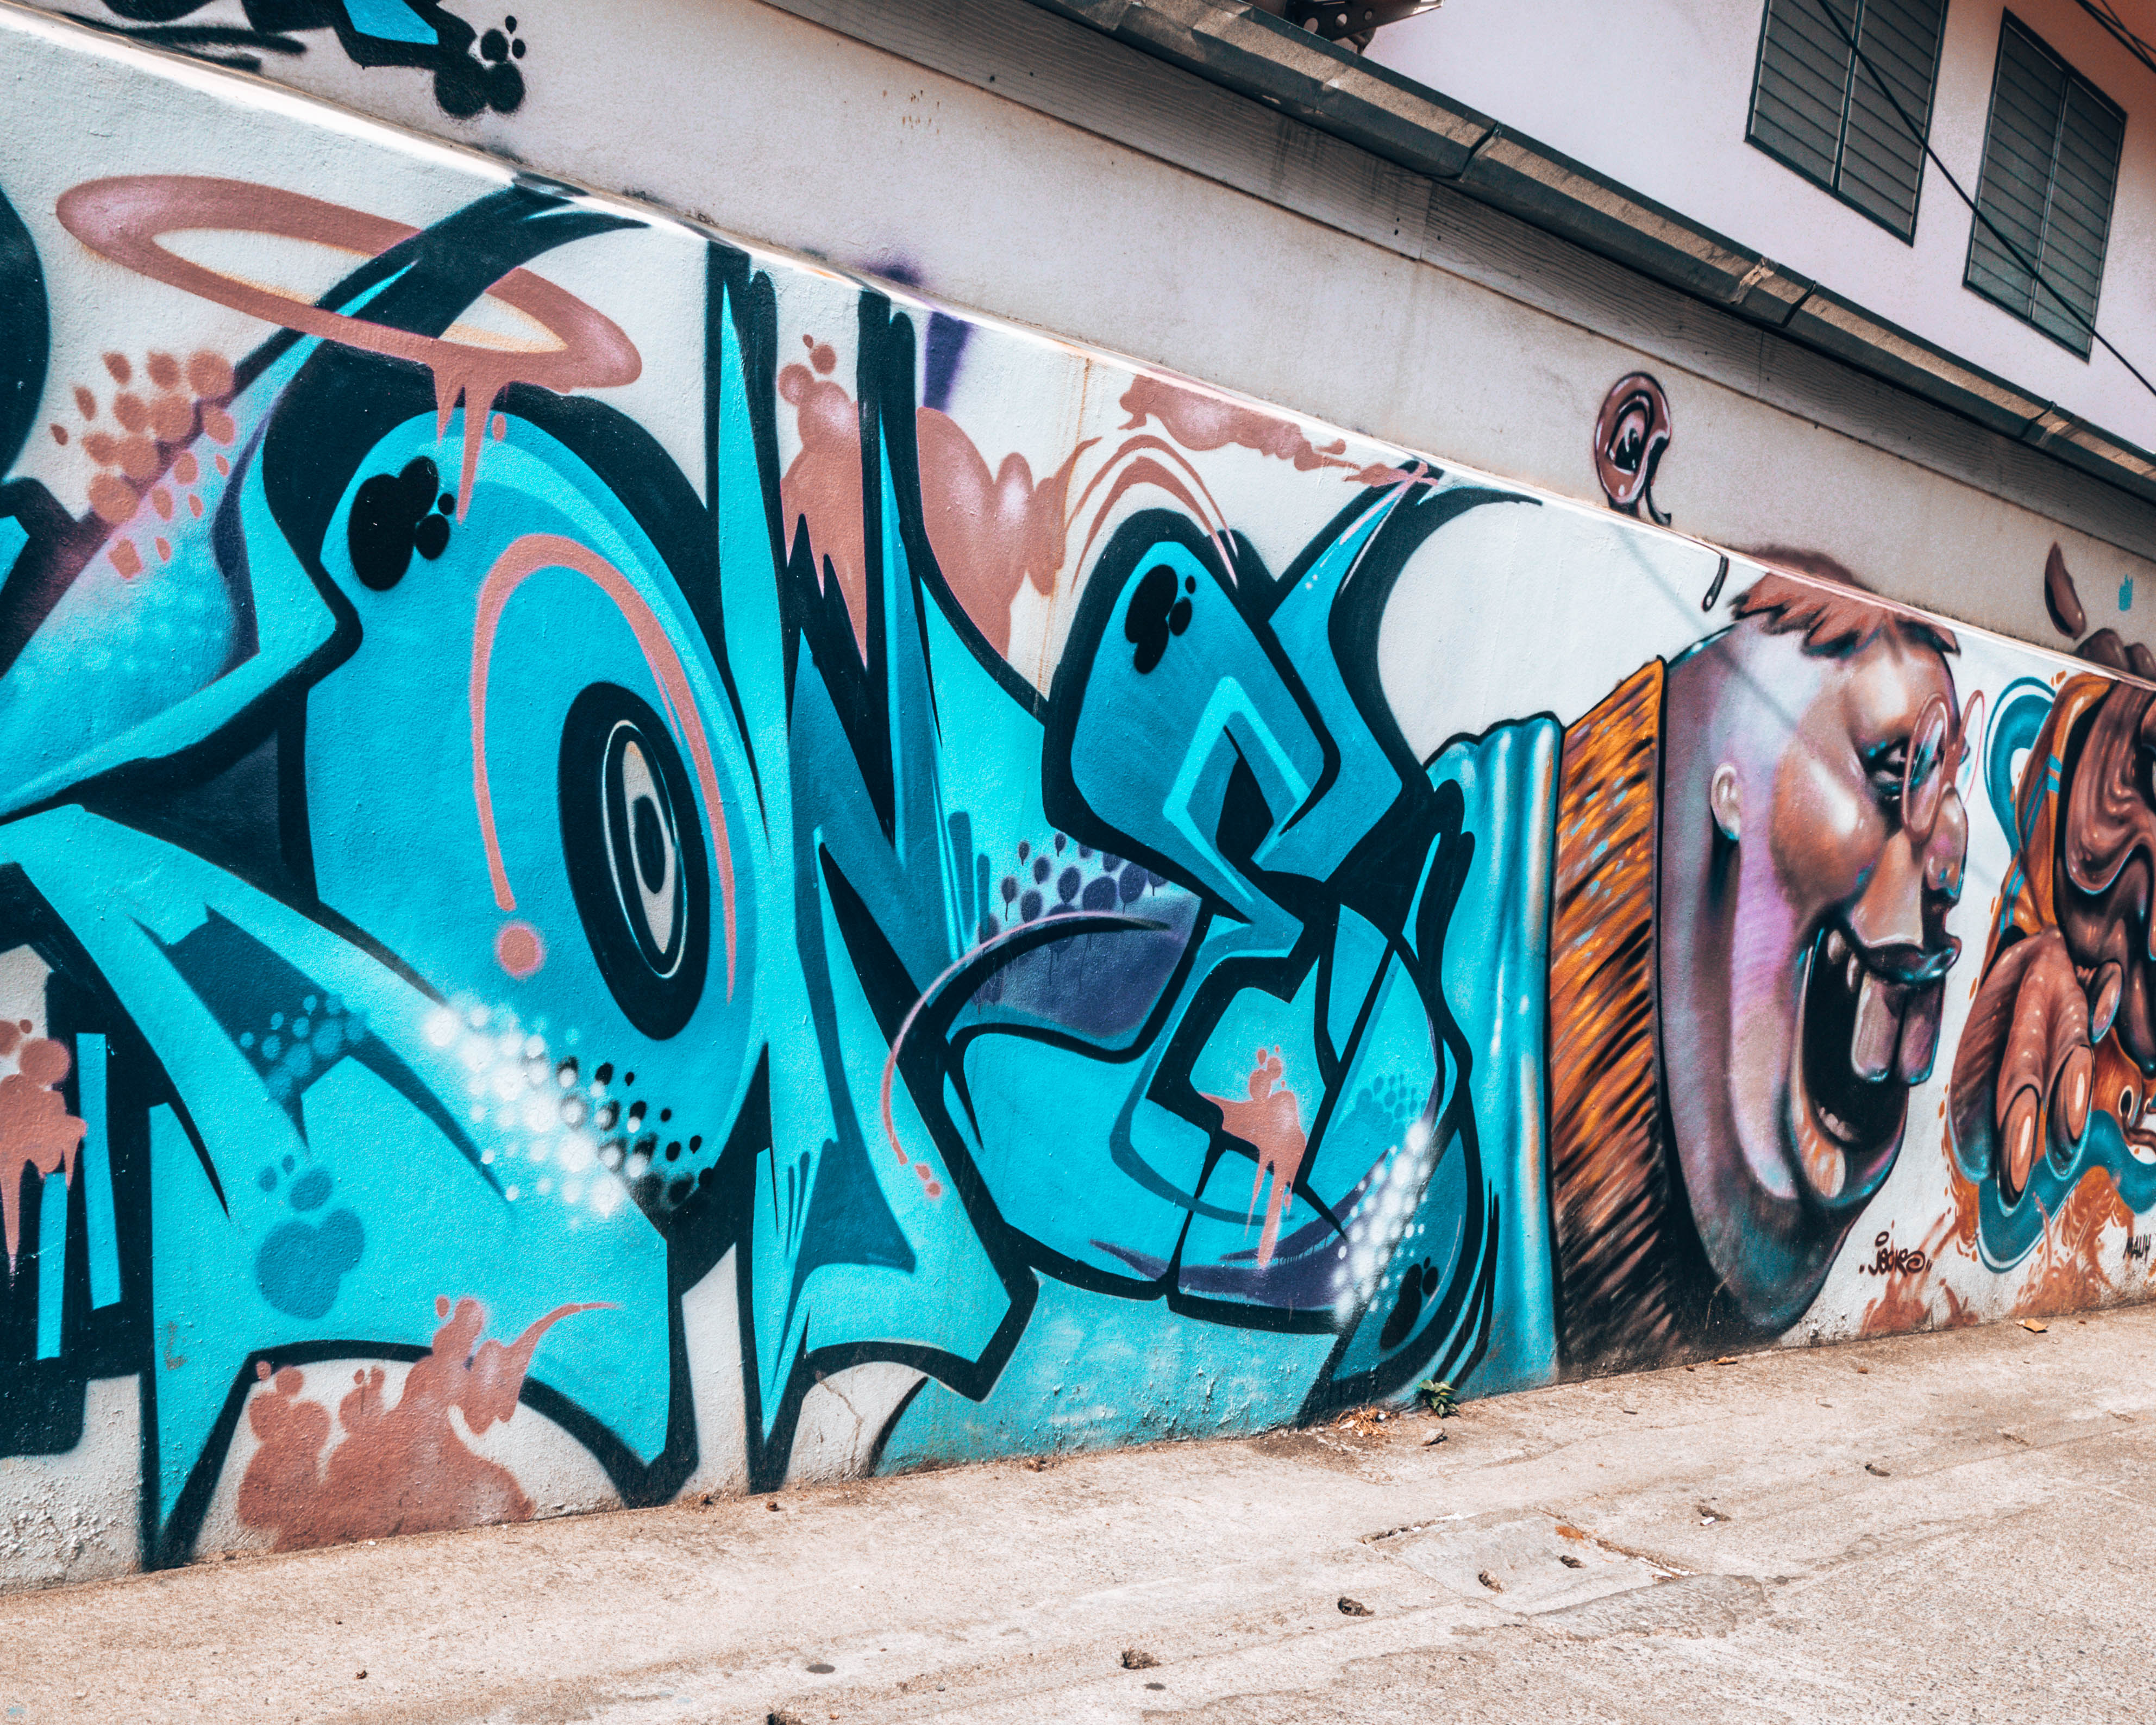 a mix of graffiti and street art in Chiang Mai - WeDidItOurWay.com